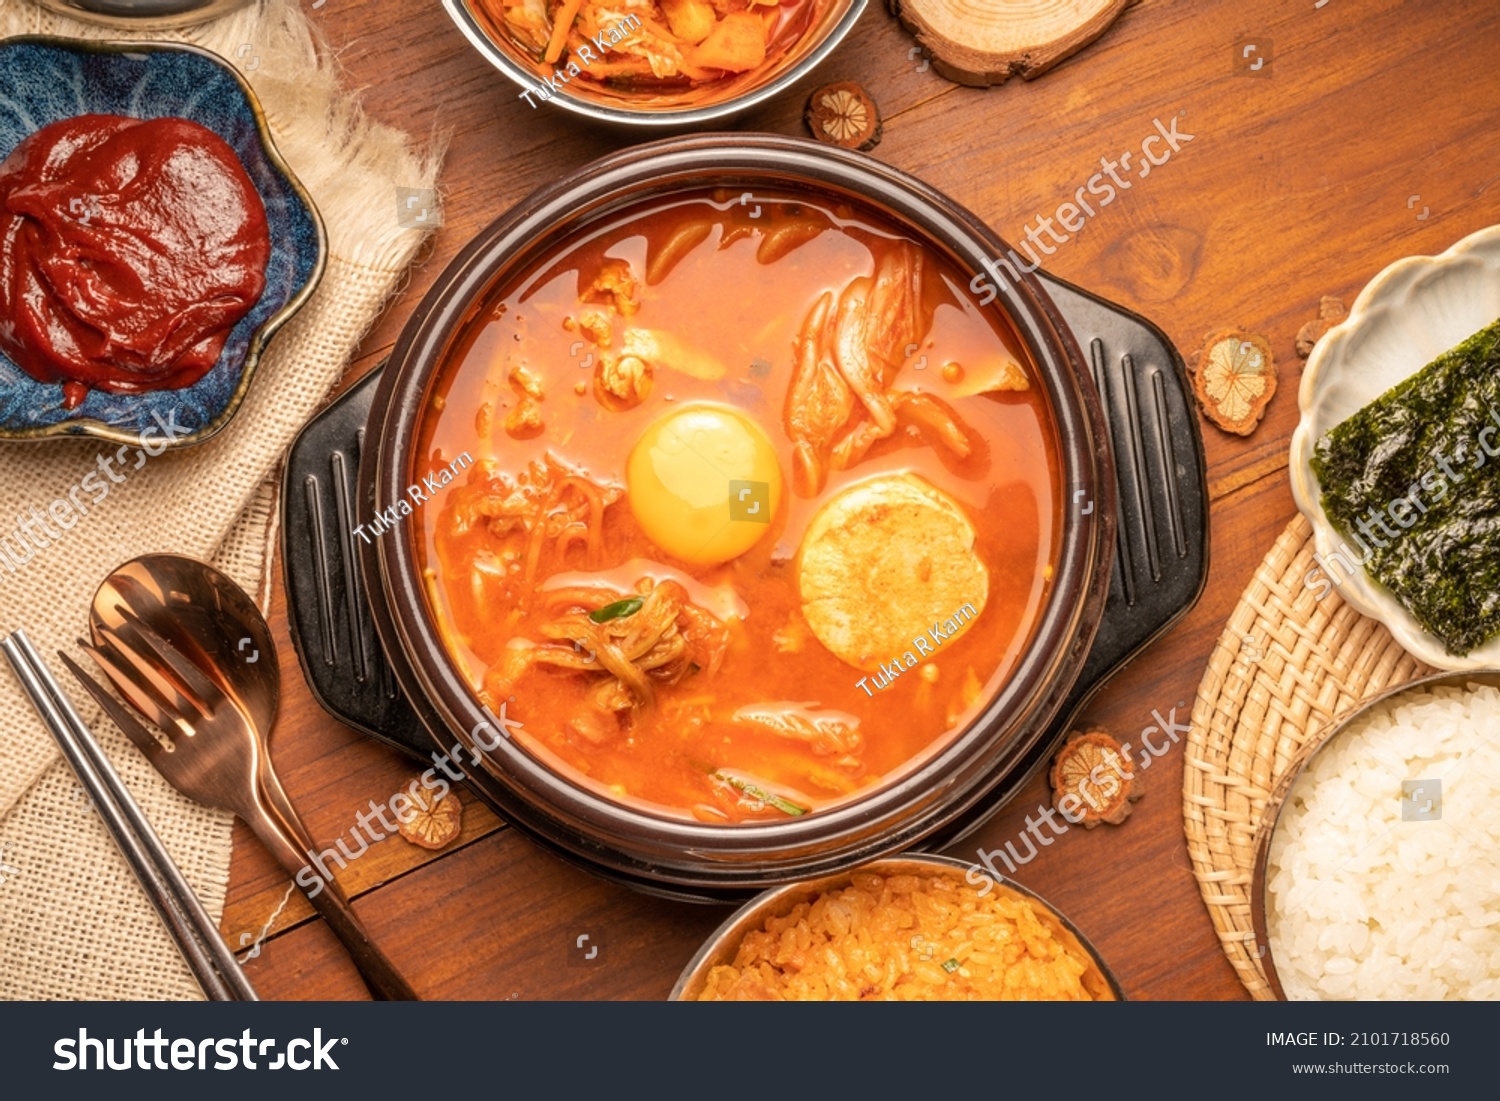 Kimchi stew or Kimchi soup, Korea’s national dish spicy soup with vegetable, meat, eggs, tofu served in a hot pot. Kimchi Jjigae korean trditional food. #2101718560